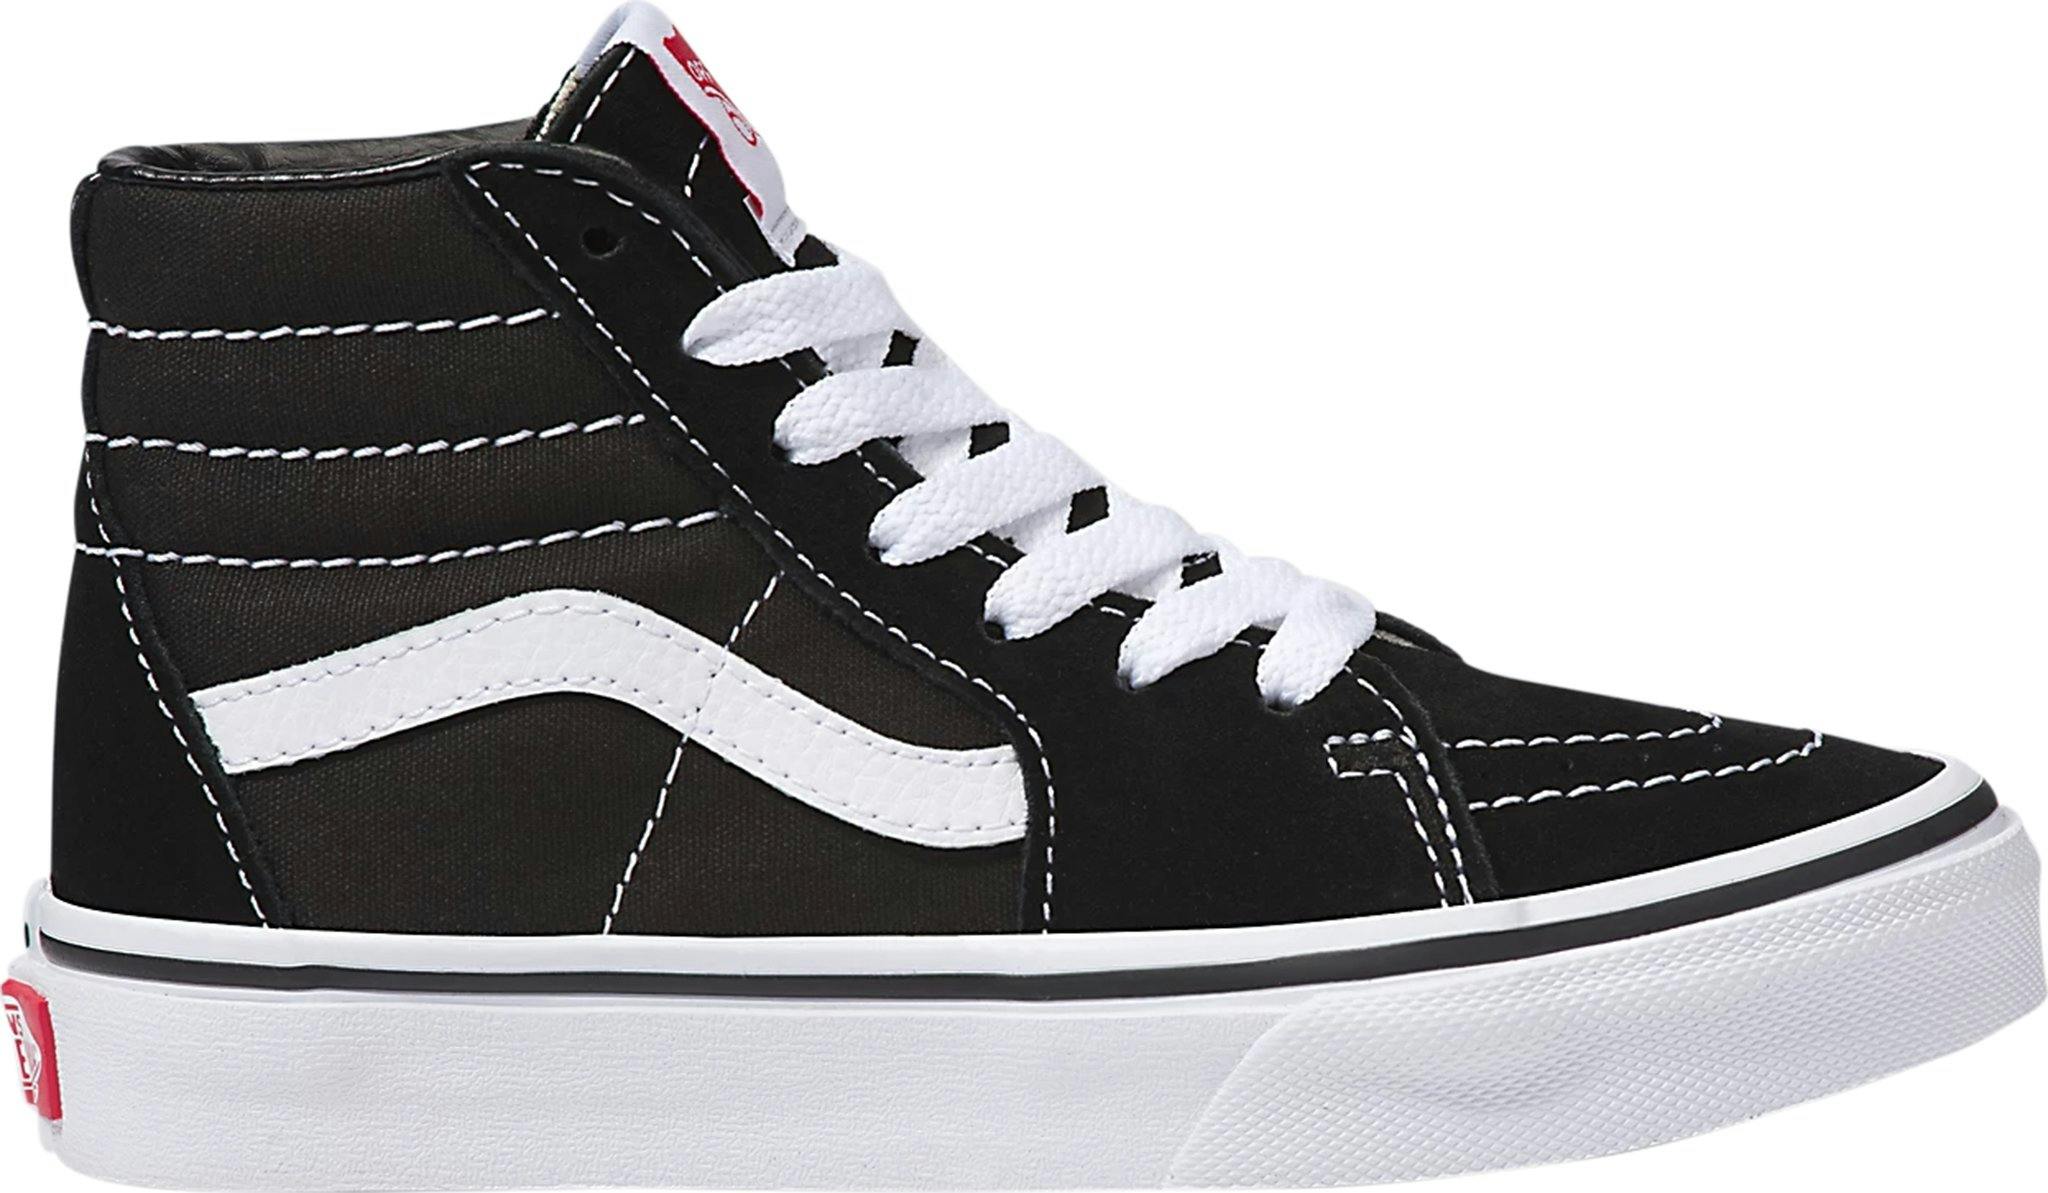 Product image for SK8-Hi Shoes - Kid